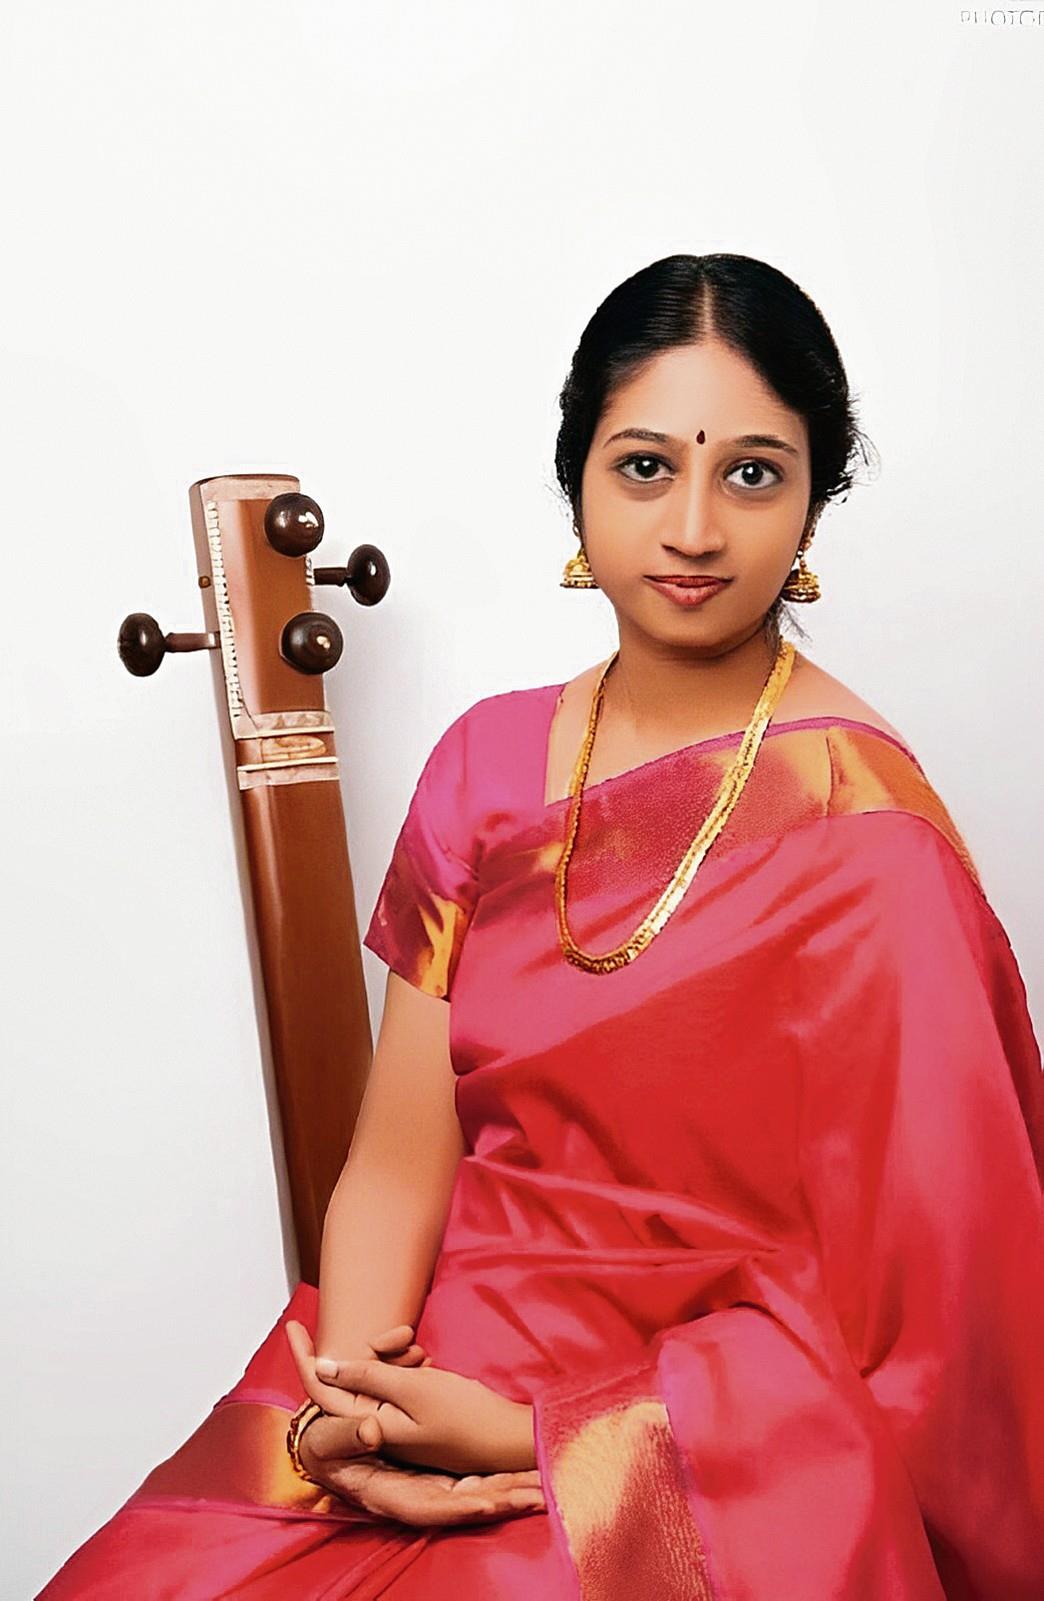 Meet five musicians who are shaping the future of Indian classical music